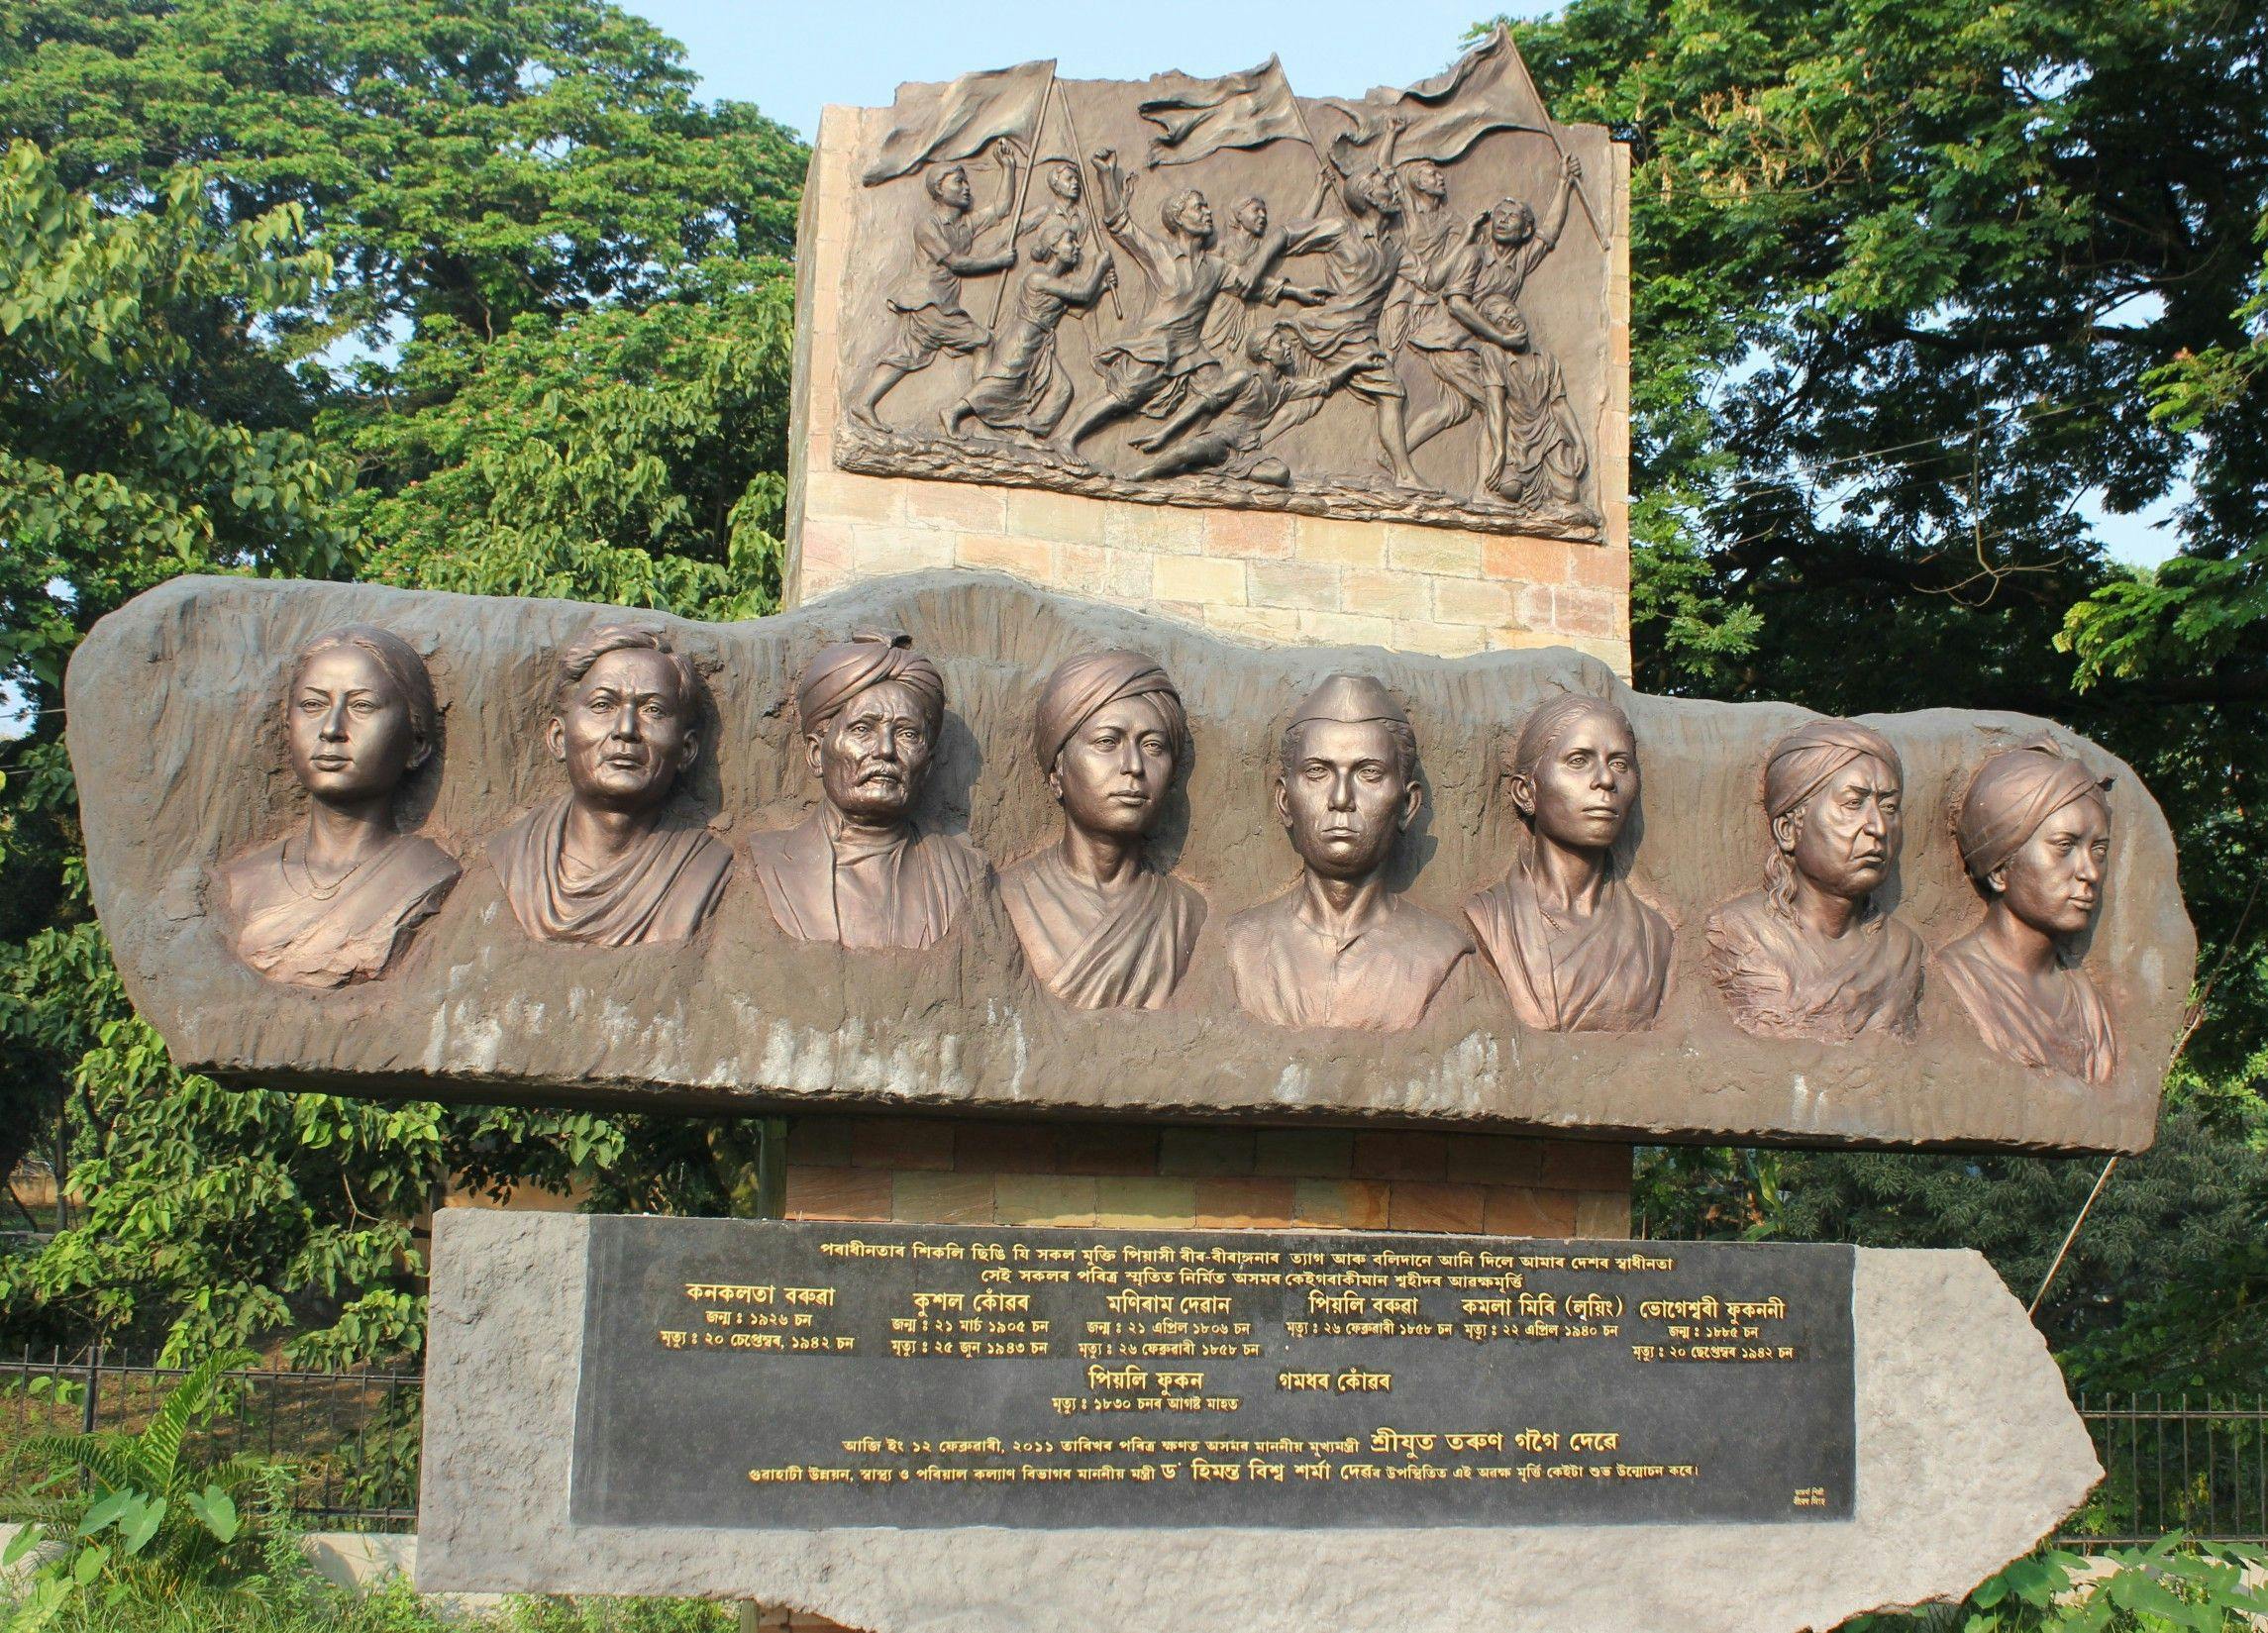 A sculpture of few martyrs from Assam; Kanaklata Barua on the extreme left